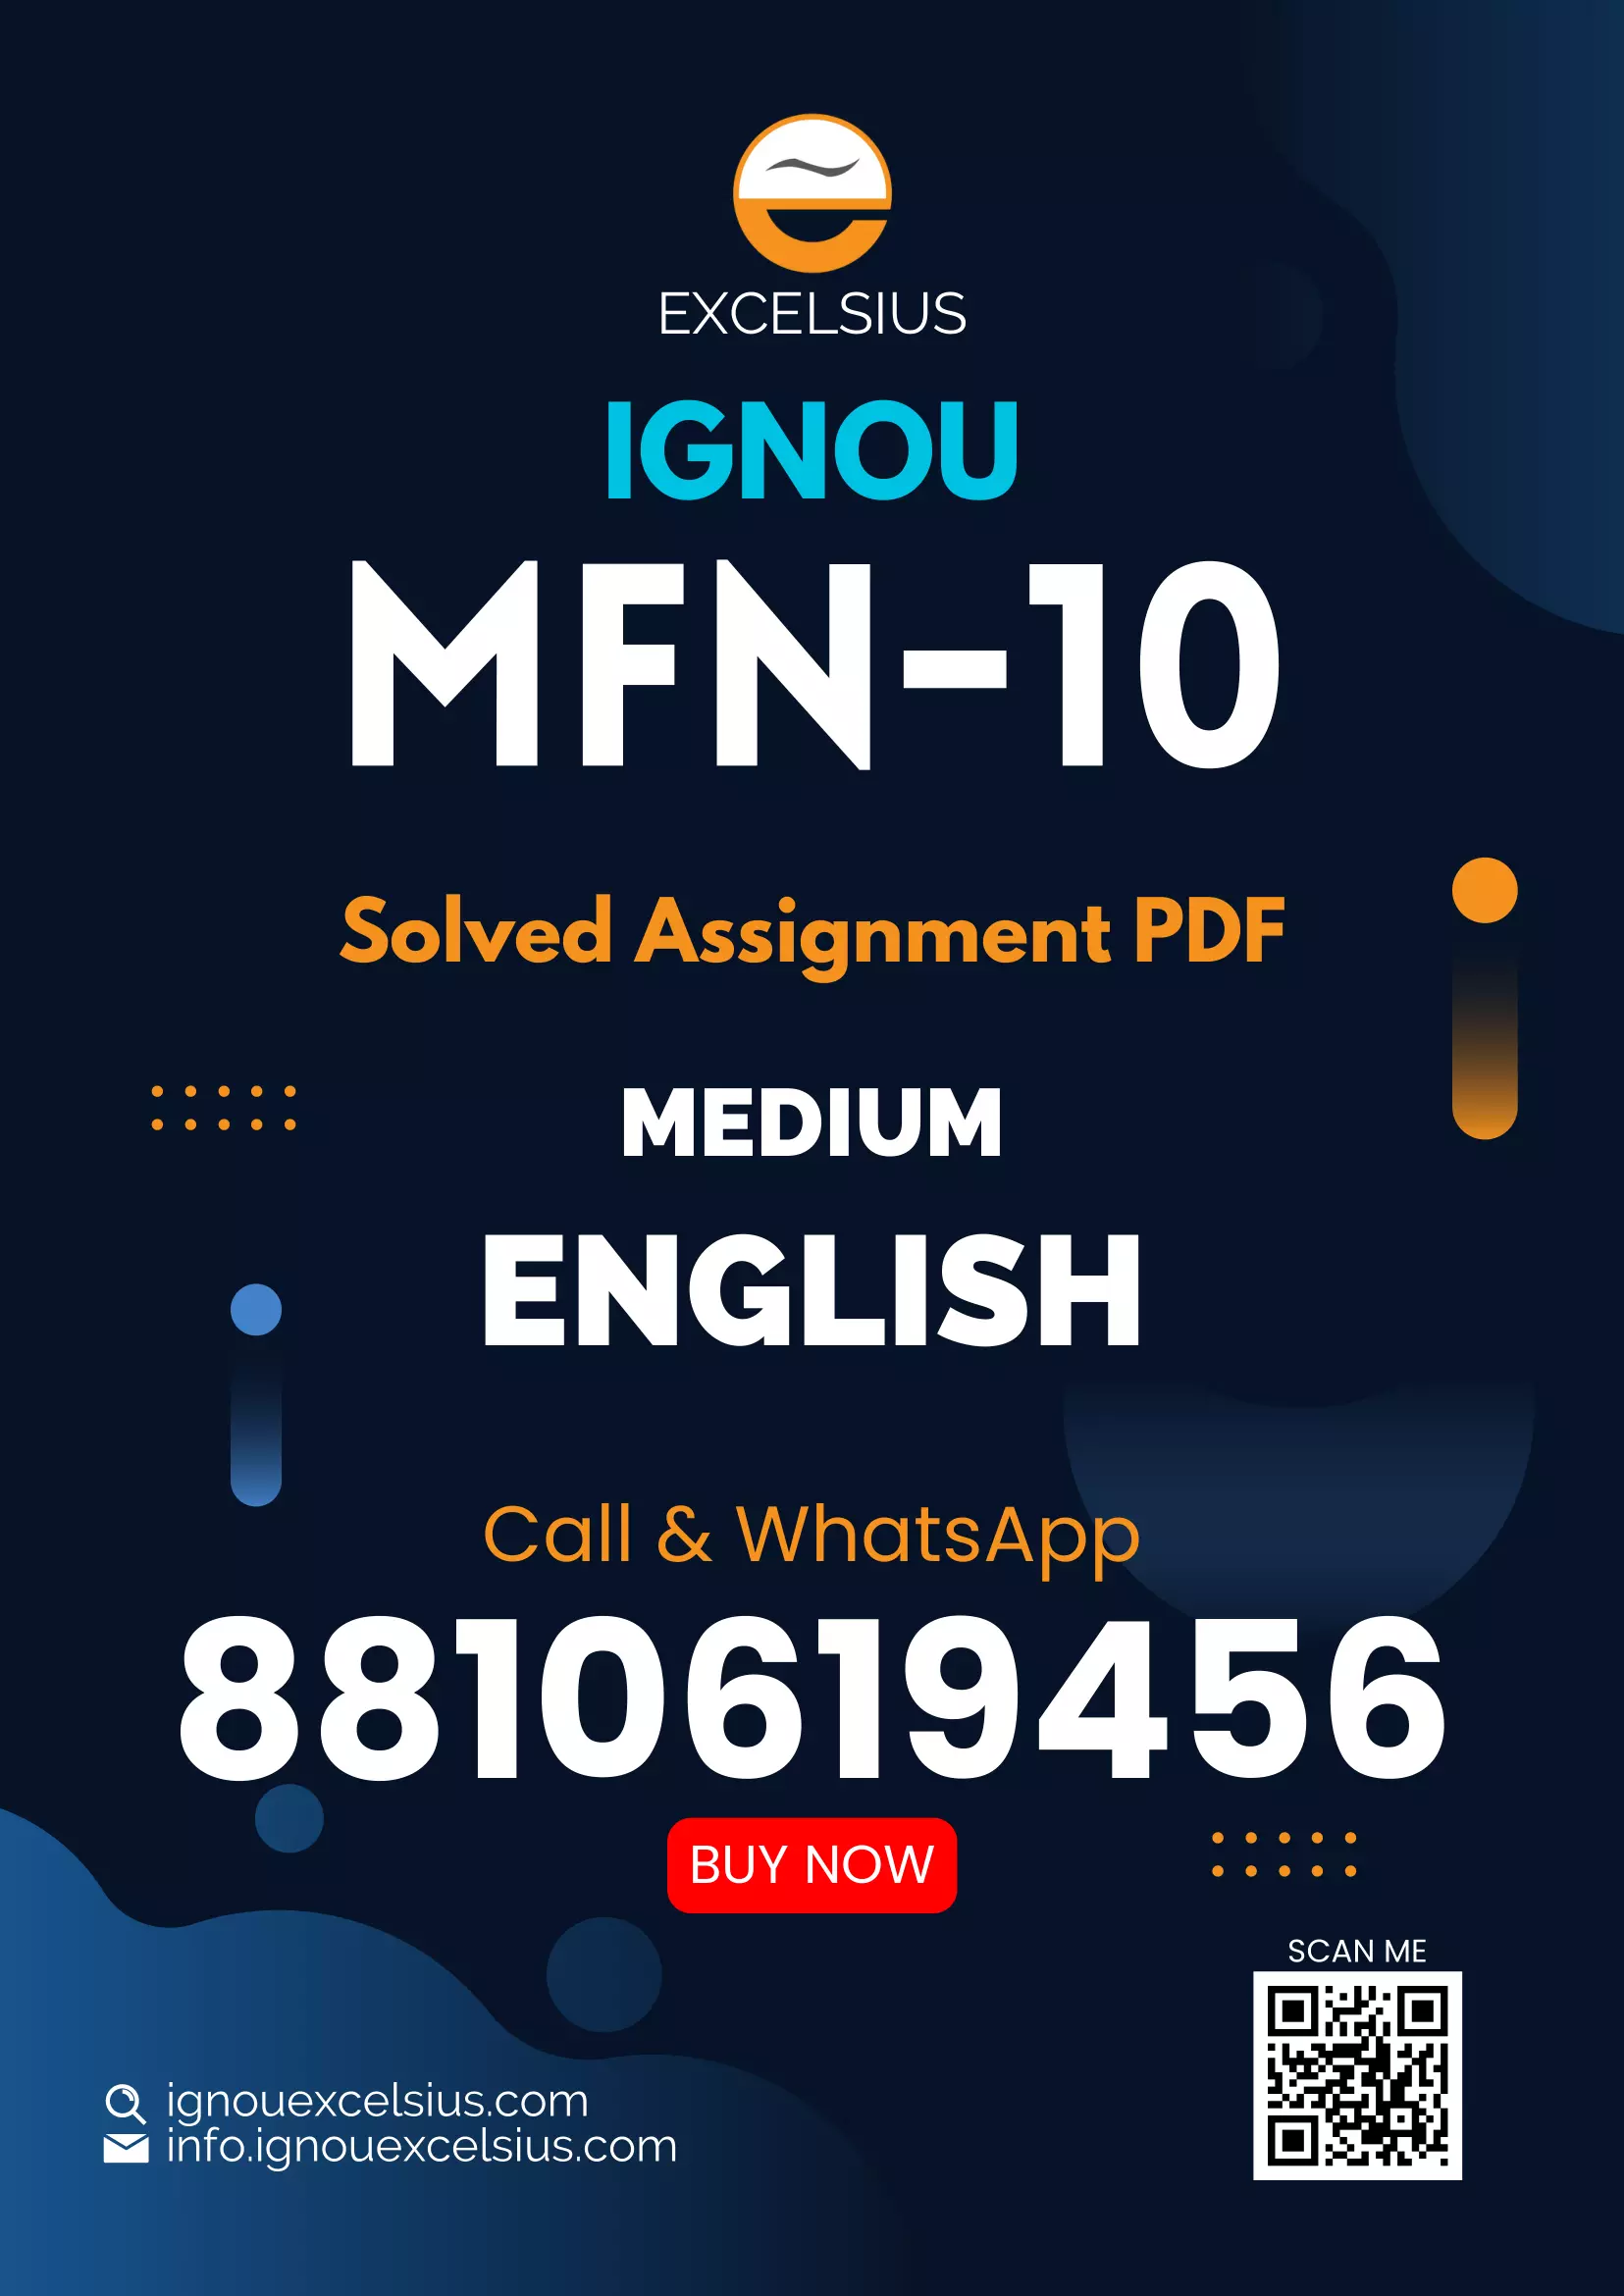 IGNOU MFN-10 - Understanding Computer Applications, Latest Solved Assignment-July 2022 – January 2023